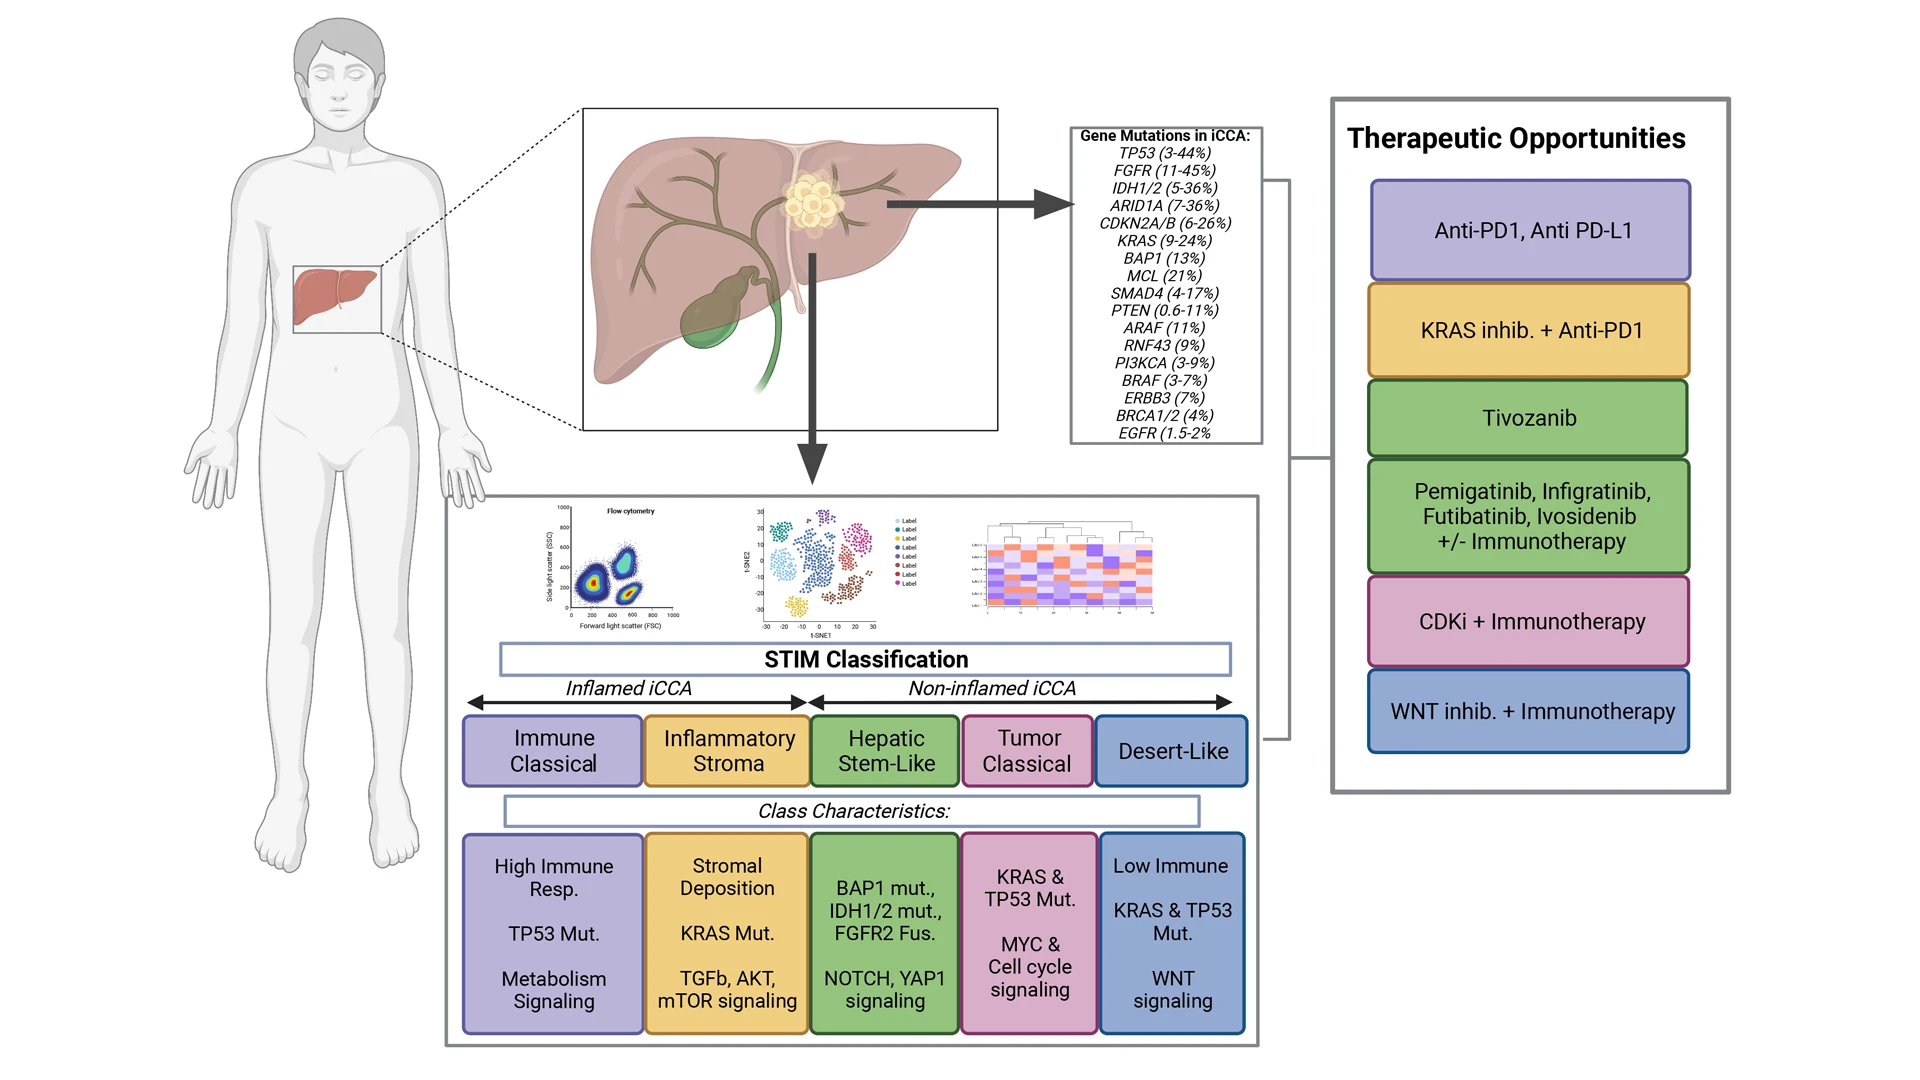 A schematic of the gene mutations that could occur in intrahepatic cholangiocarcinoma, the different tumor classifications, and potential therapeutic options.